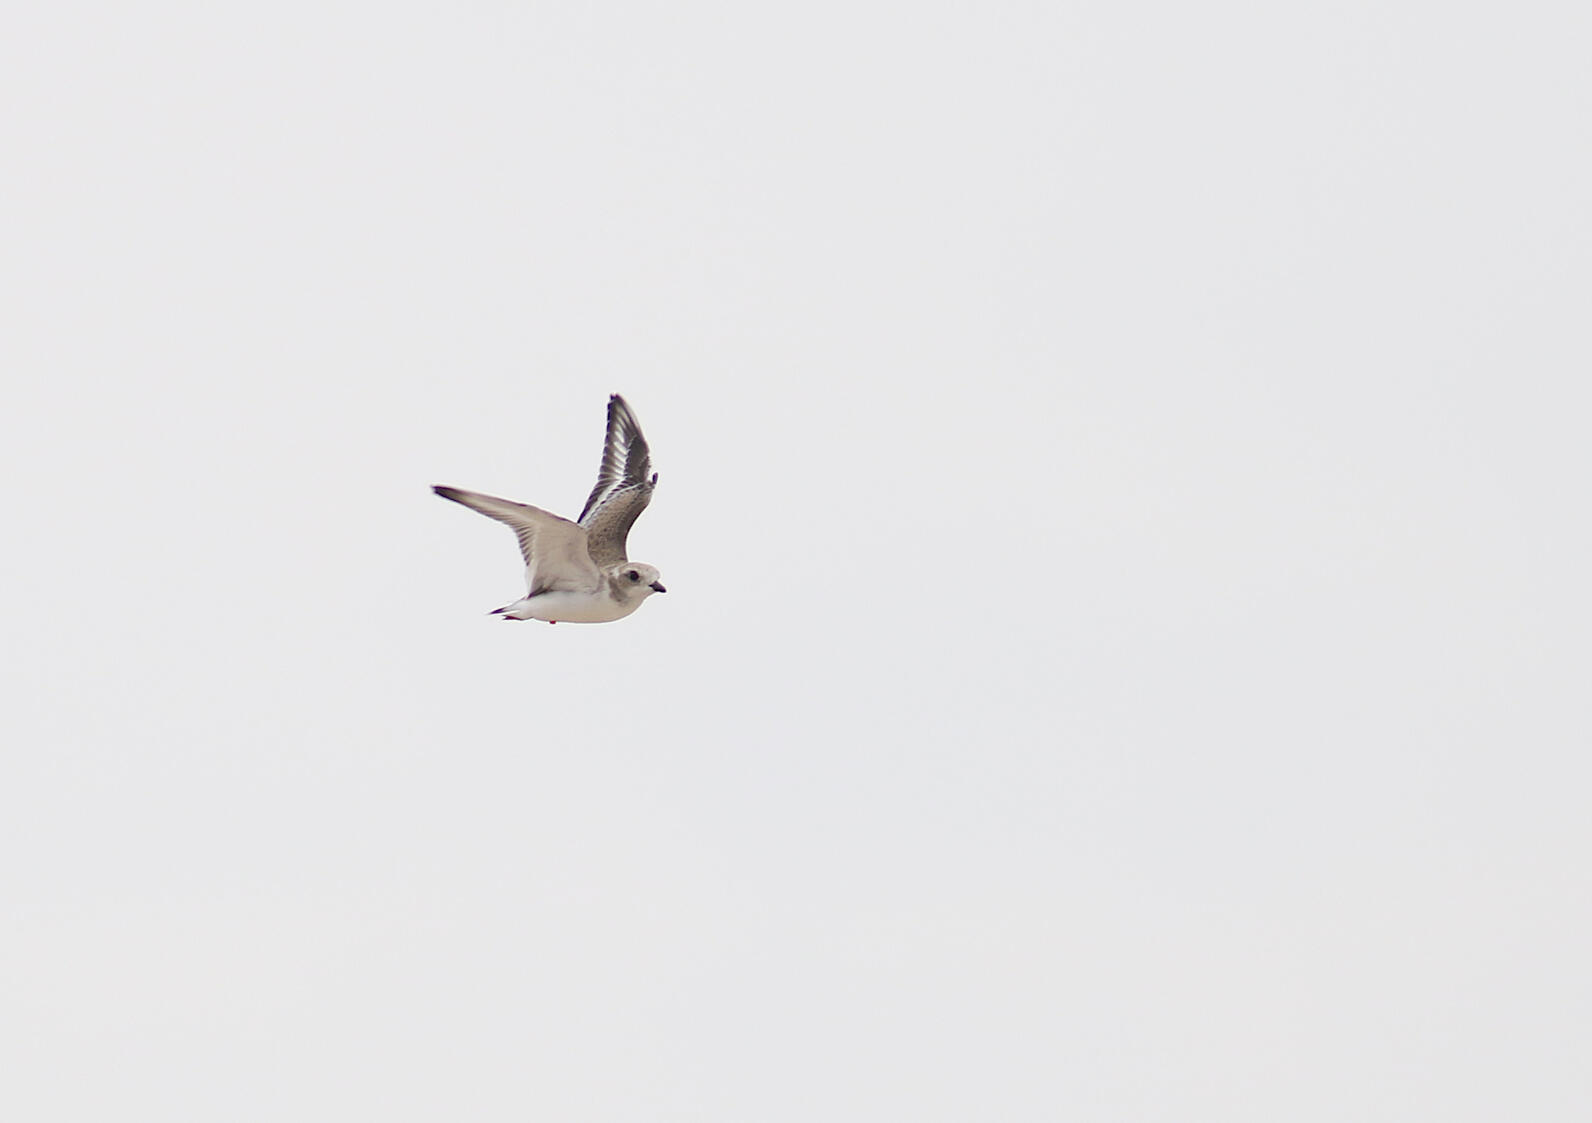 Released-captive reared piping plover chick flies over Cat Islands. 